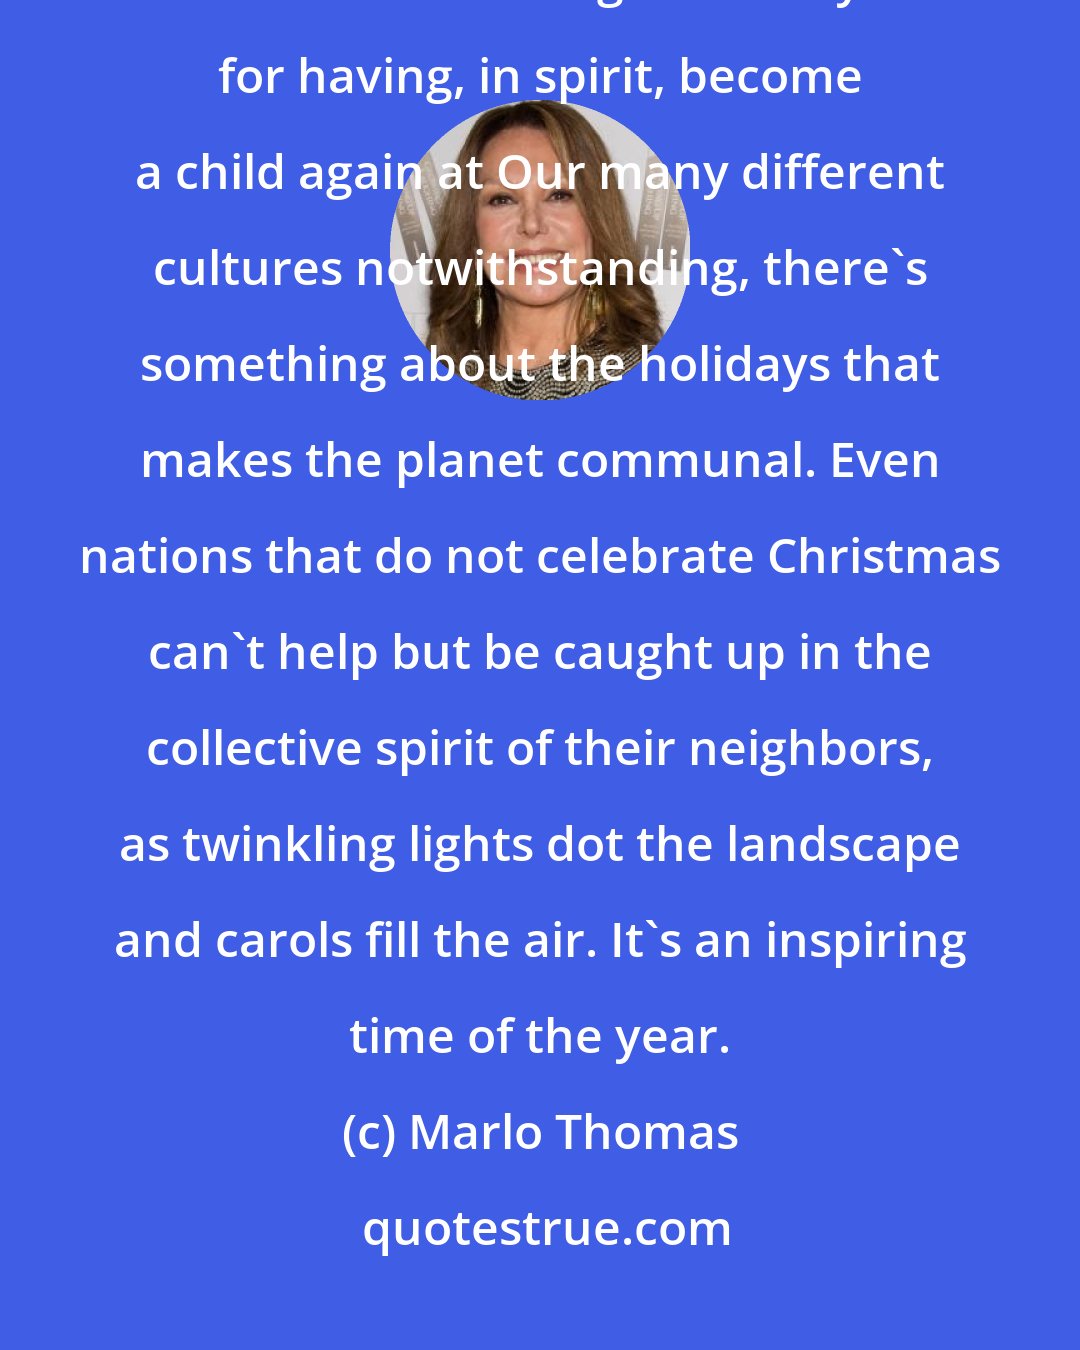 Marlo Thomas: Our hearts grow tender with childhood memories and love of kindred, and we are better throughout the year for having, in spirit, become a child again at Our many different cultures notwithstanding, there's something about the holidays that makes the planet communal. Even nations that do not celebrate Christmas can't help but be caught up in the collective spirit of their neighbors, as twinkling lights dot the landscape and carols fill the air. It's an inspiring time of the year.